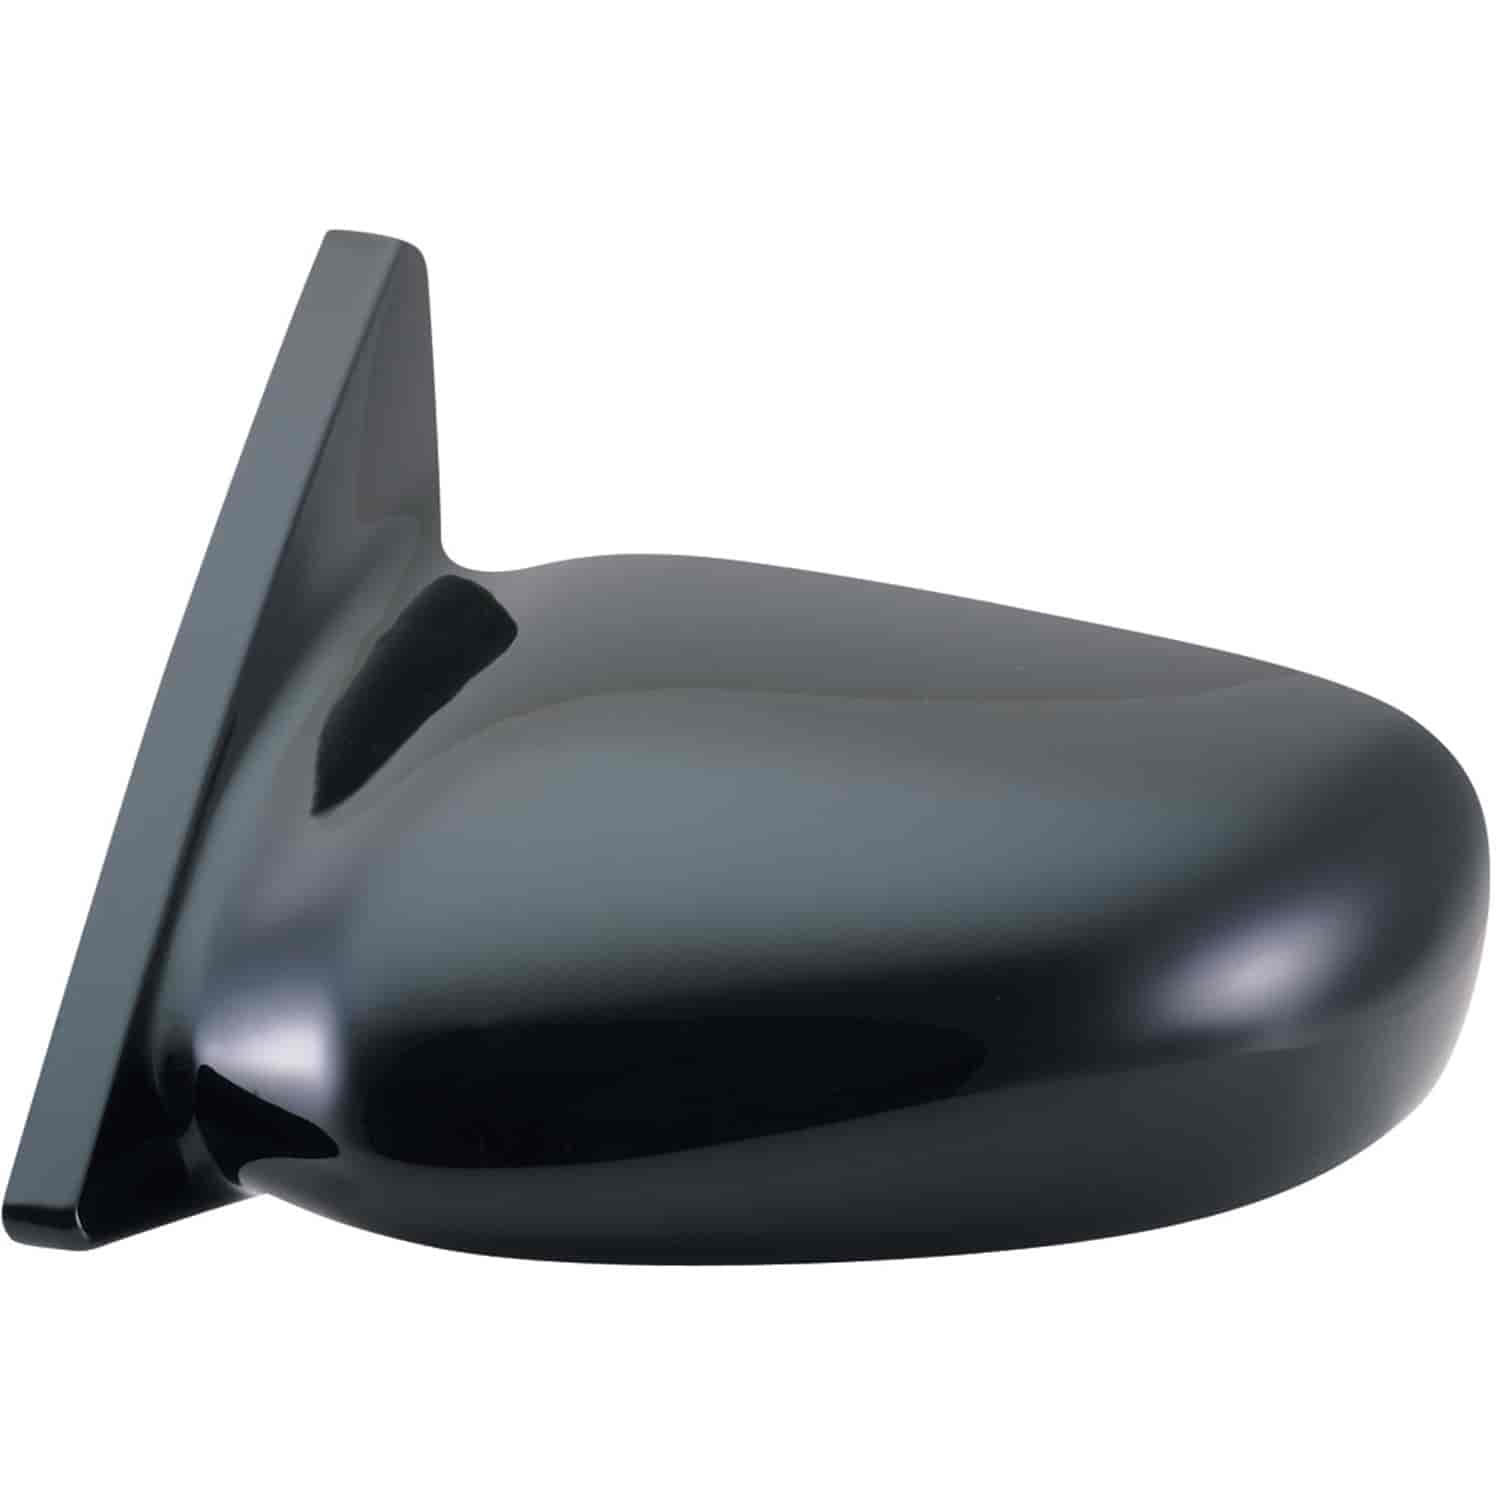 OEM Style Replacement mirror for 00-05 Mitsubishi Eclipse driver side mirror tested to fit and funct